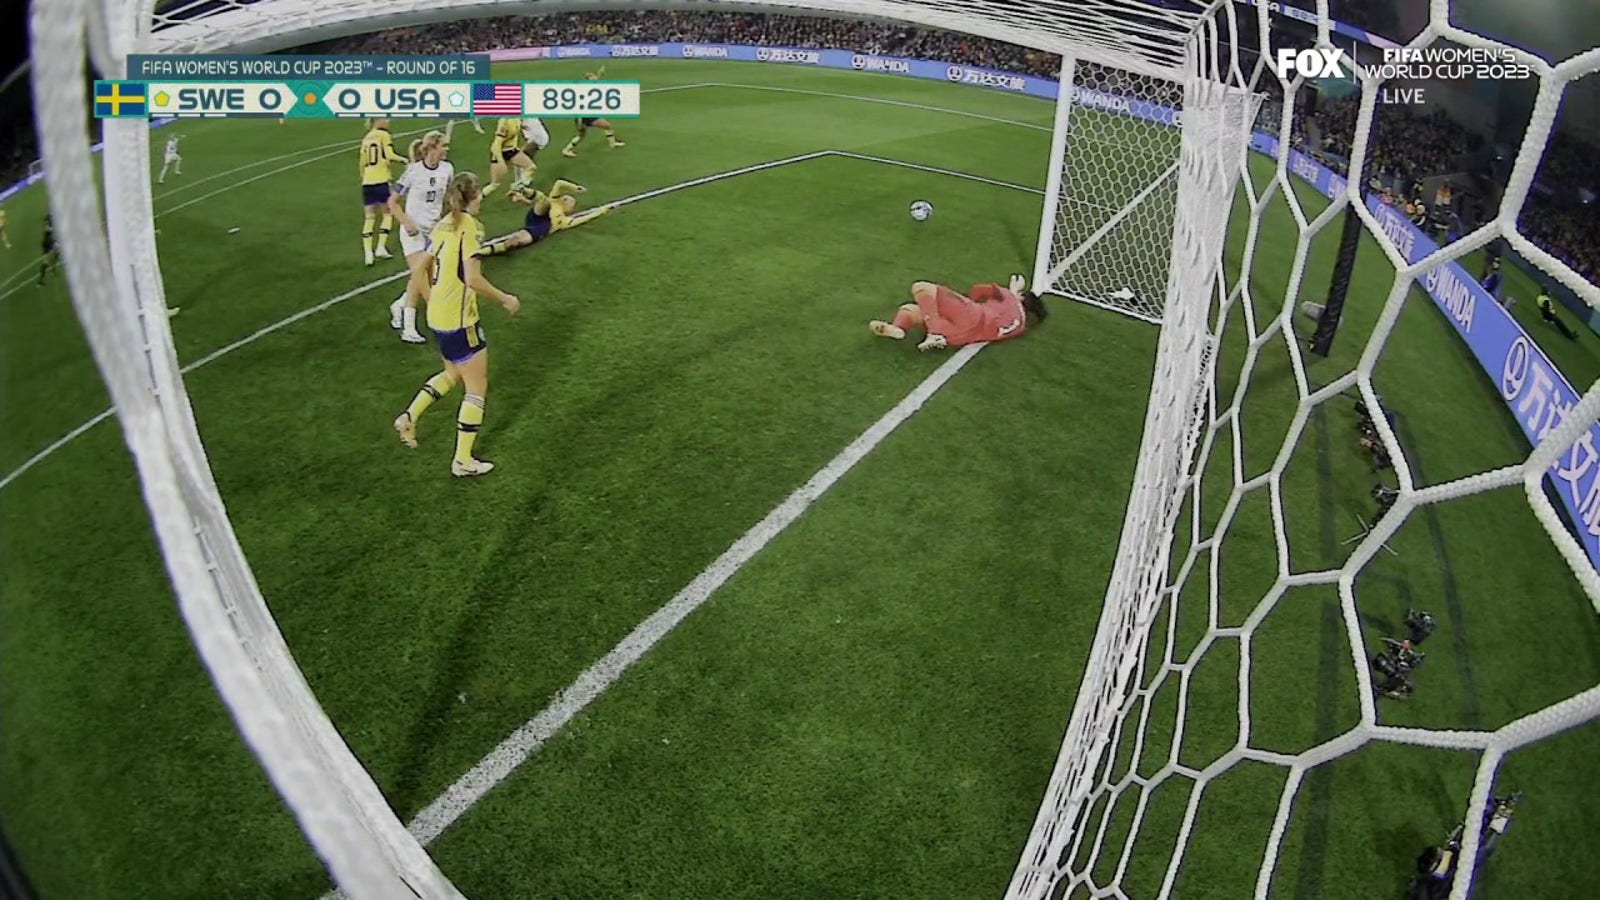 Sweden's Zecira Musovic makes a spectacular save vs. the United States